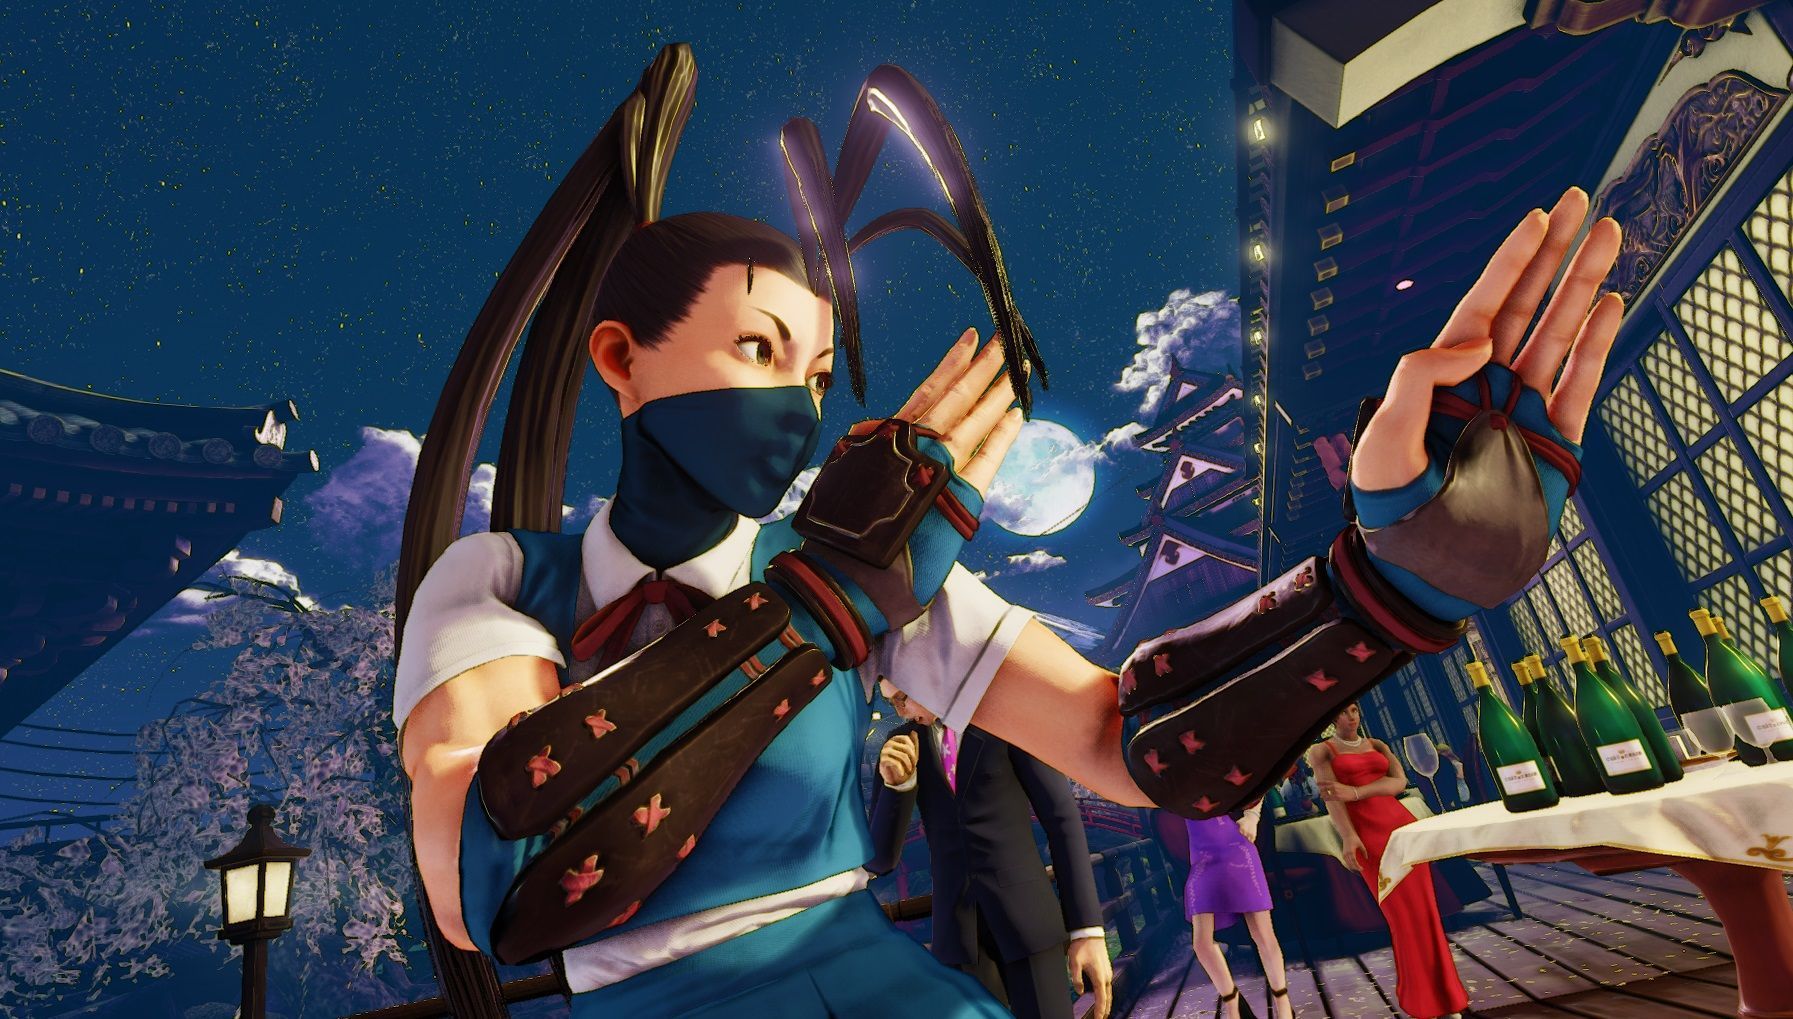 SFV Season 5 Characters' Reveals Coming August 5, 2020